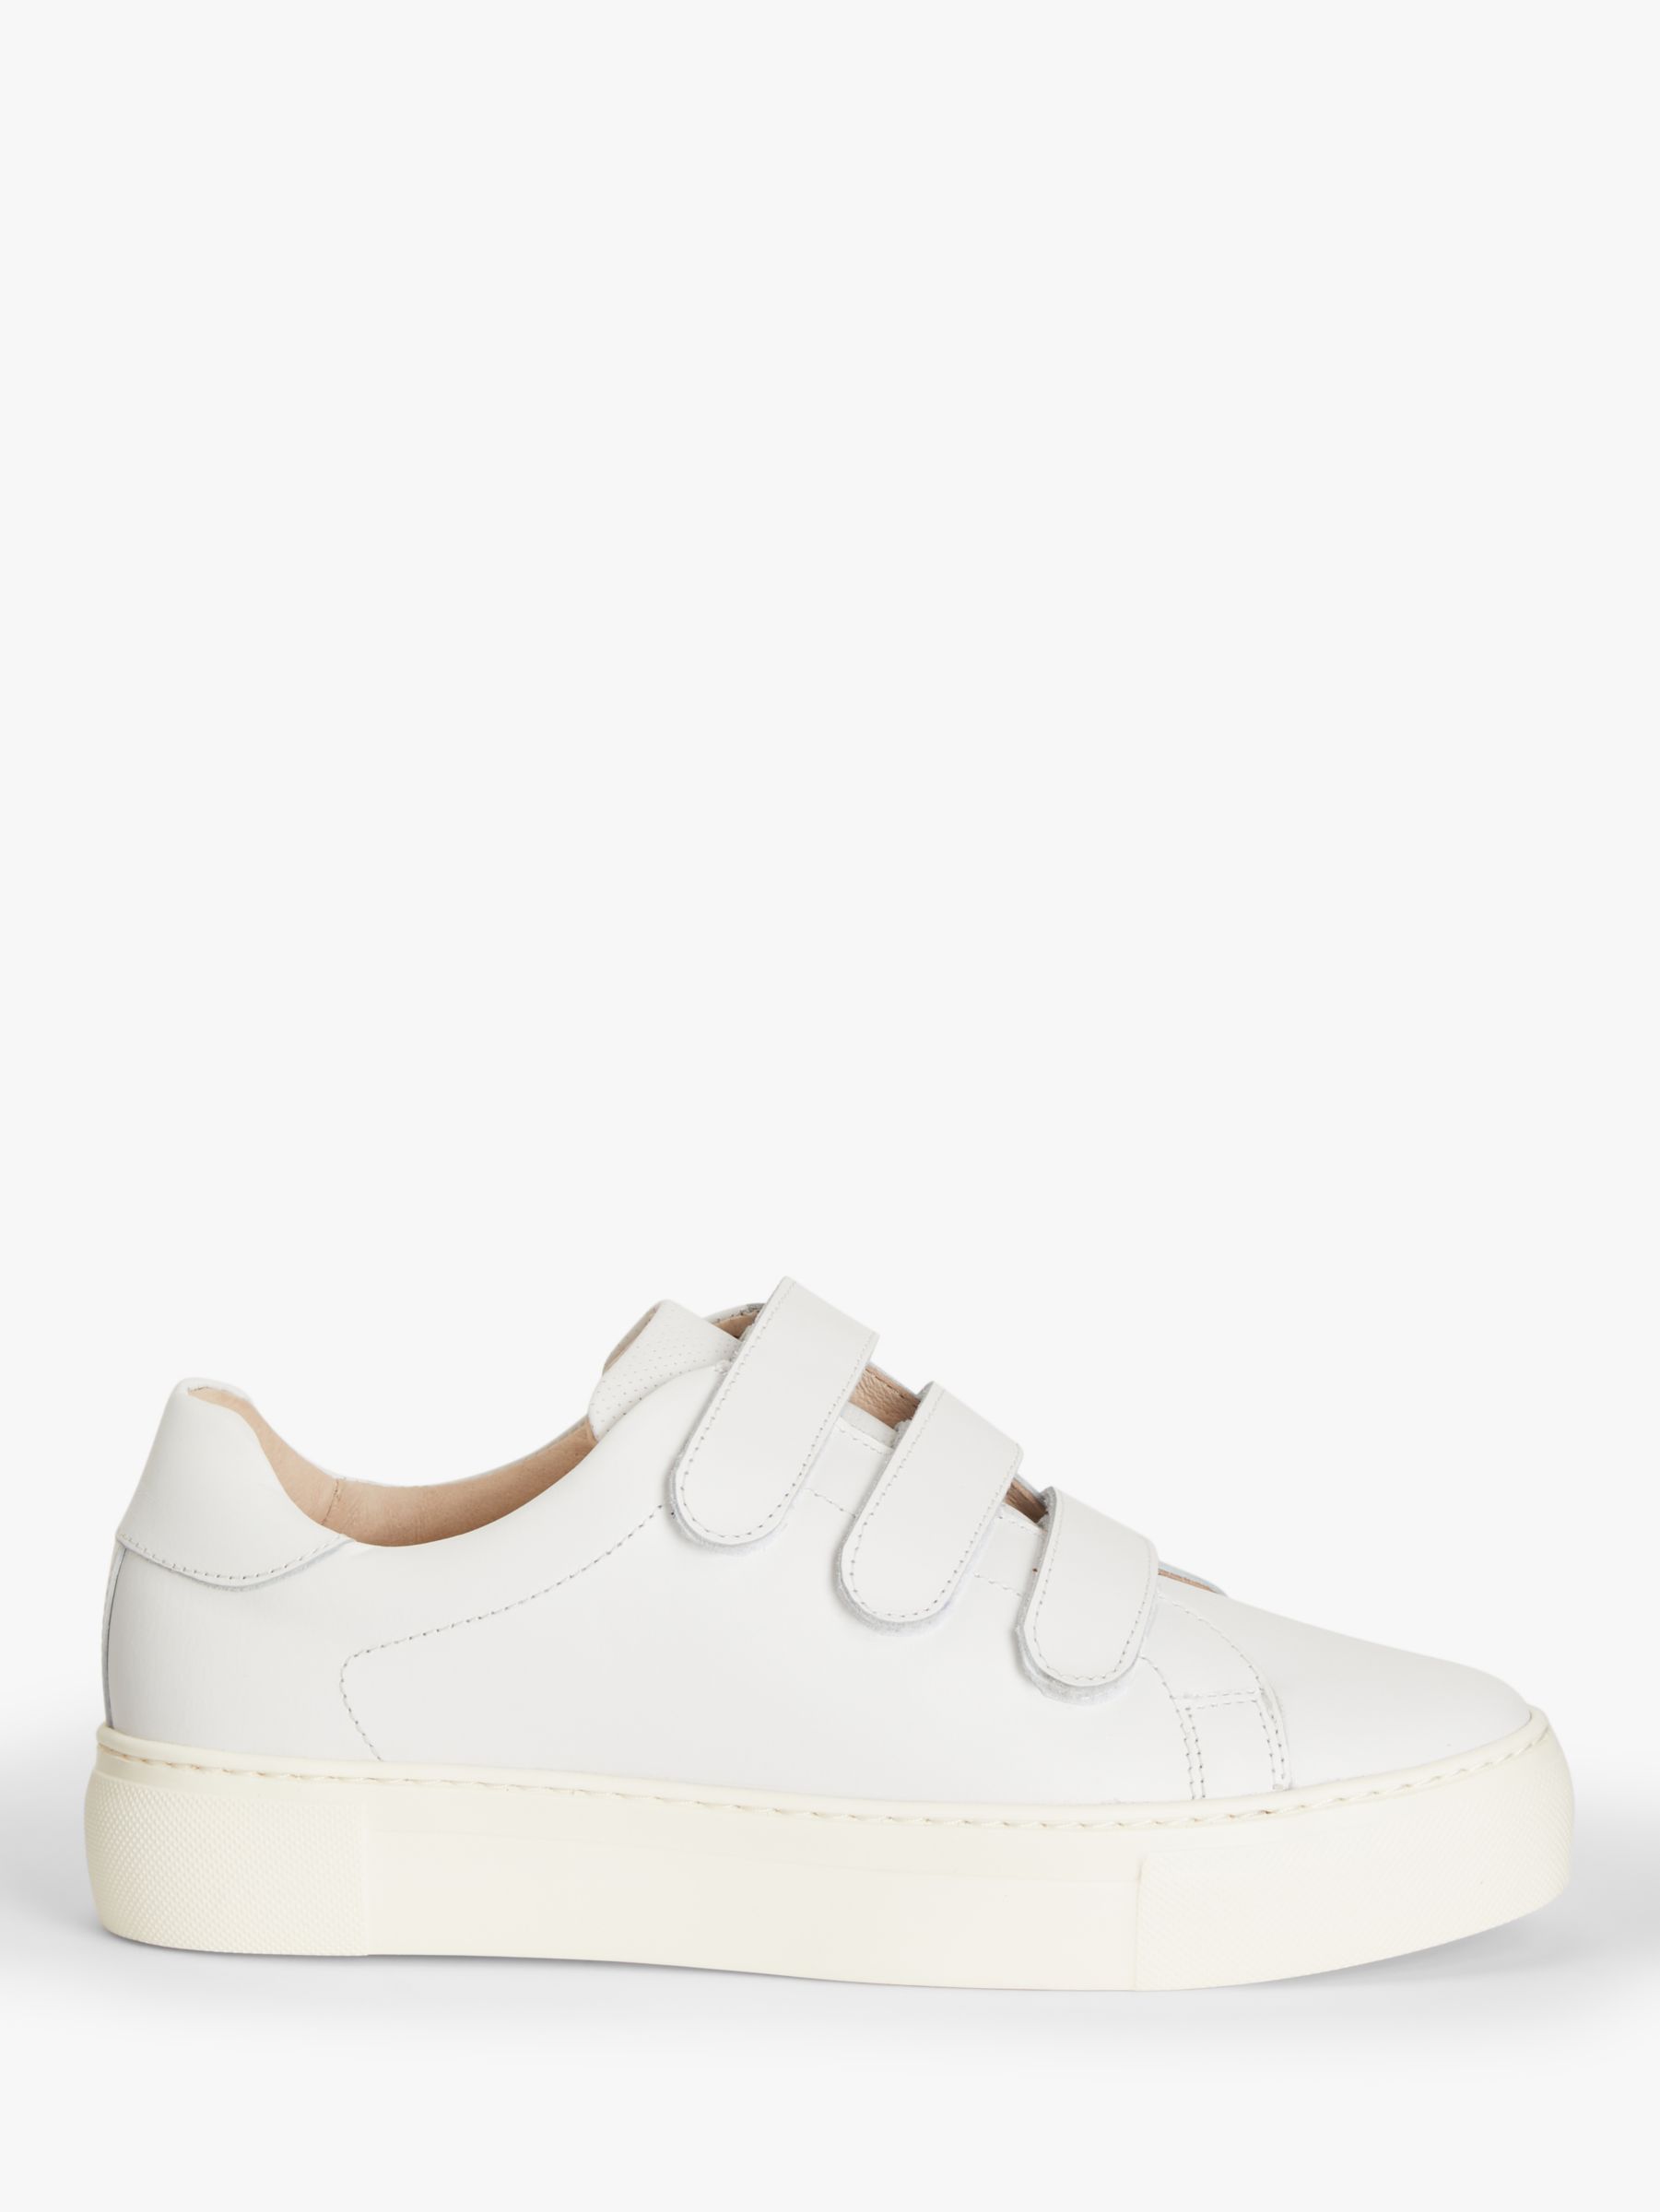 John Lewis Fawne Ripstop Trainers